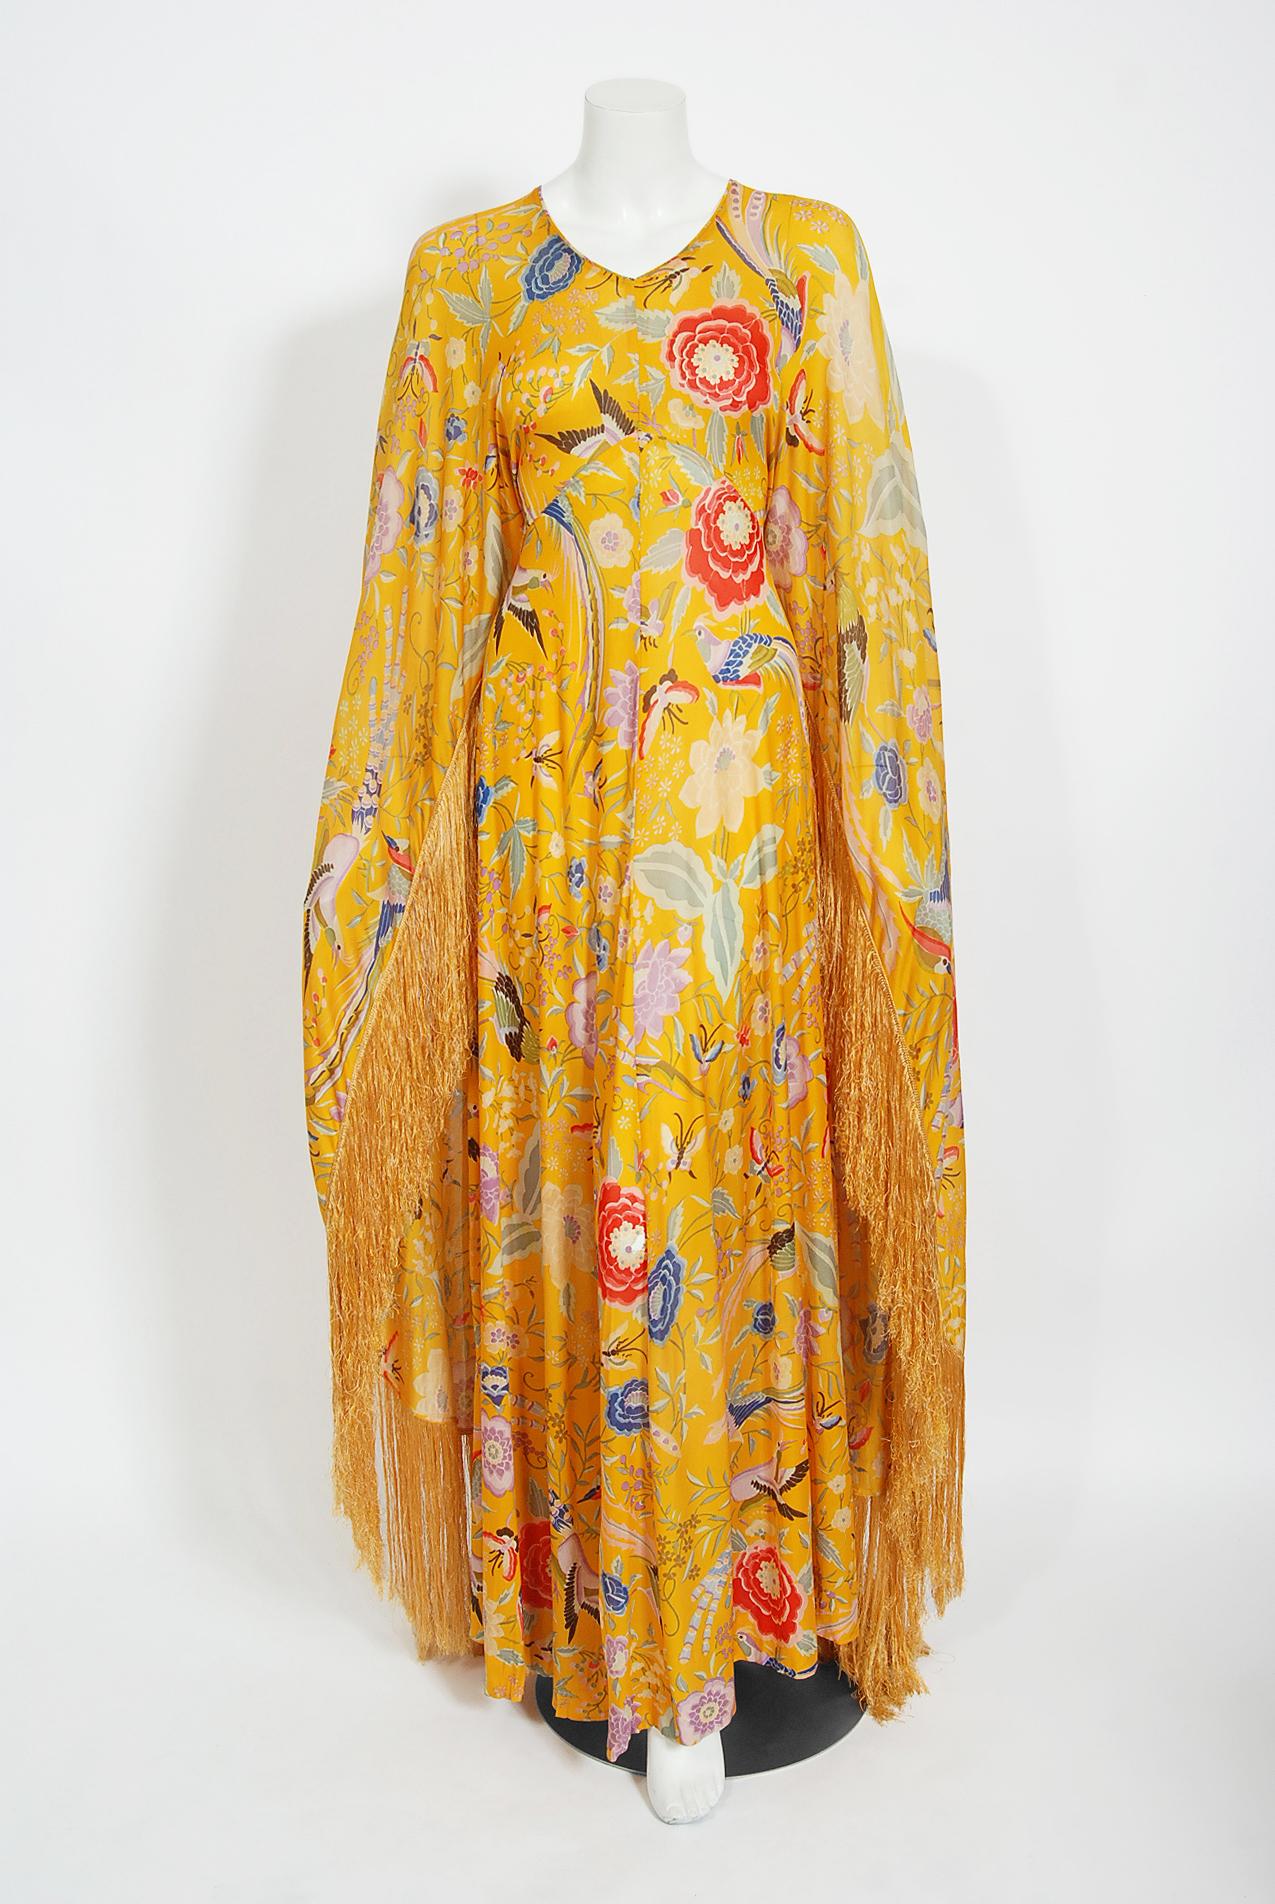 Breathtaking Missoni Couture documented iconic marigold-yellow floral bird garden print caftan gown from their 1971 collection. Such a rare and gorgeous color! Redefining an entire genre of fashion, the 1970's were seen as Missoni's launch to fame